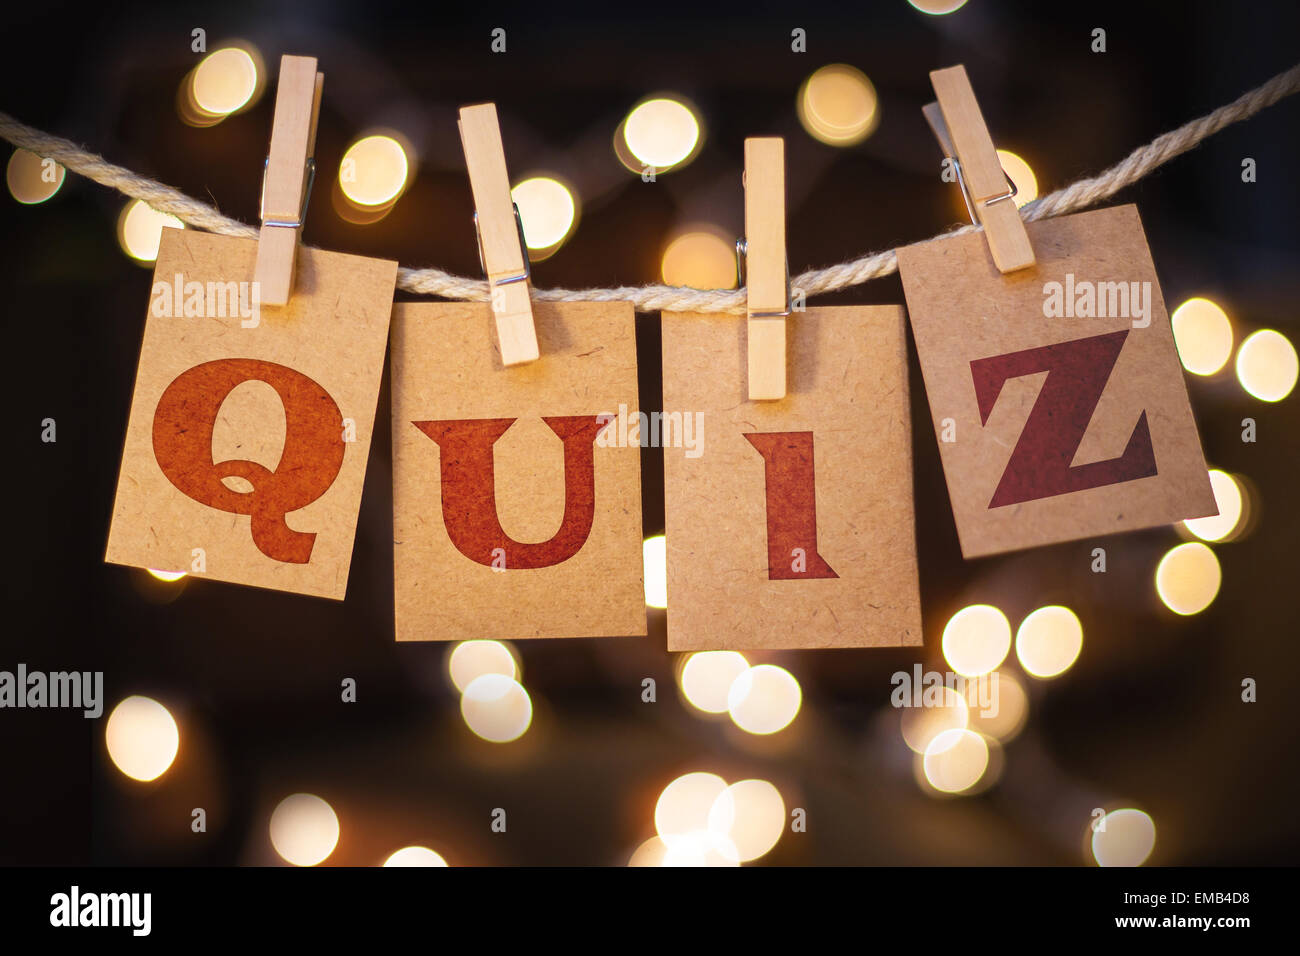 The word QUIZ printed on clothespin clipped cards in front of defocused glowing lights. Stock Photo